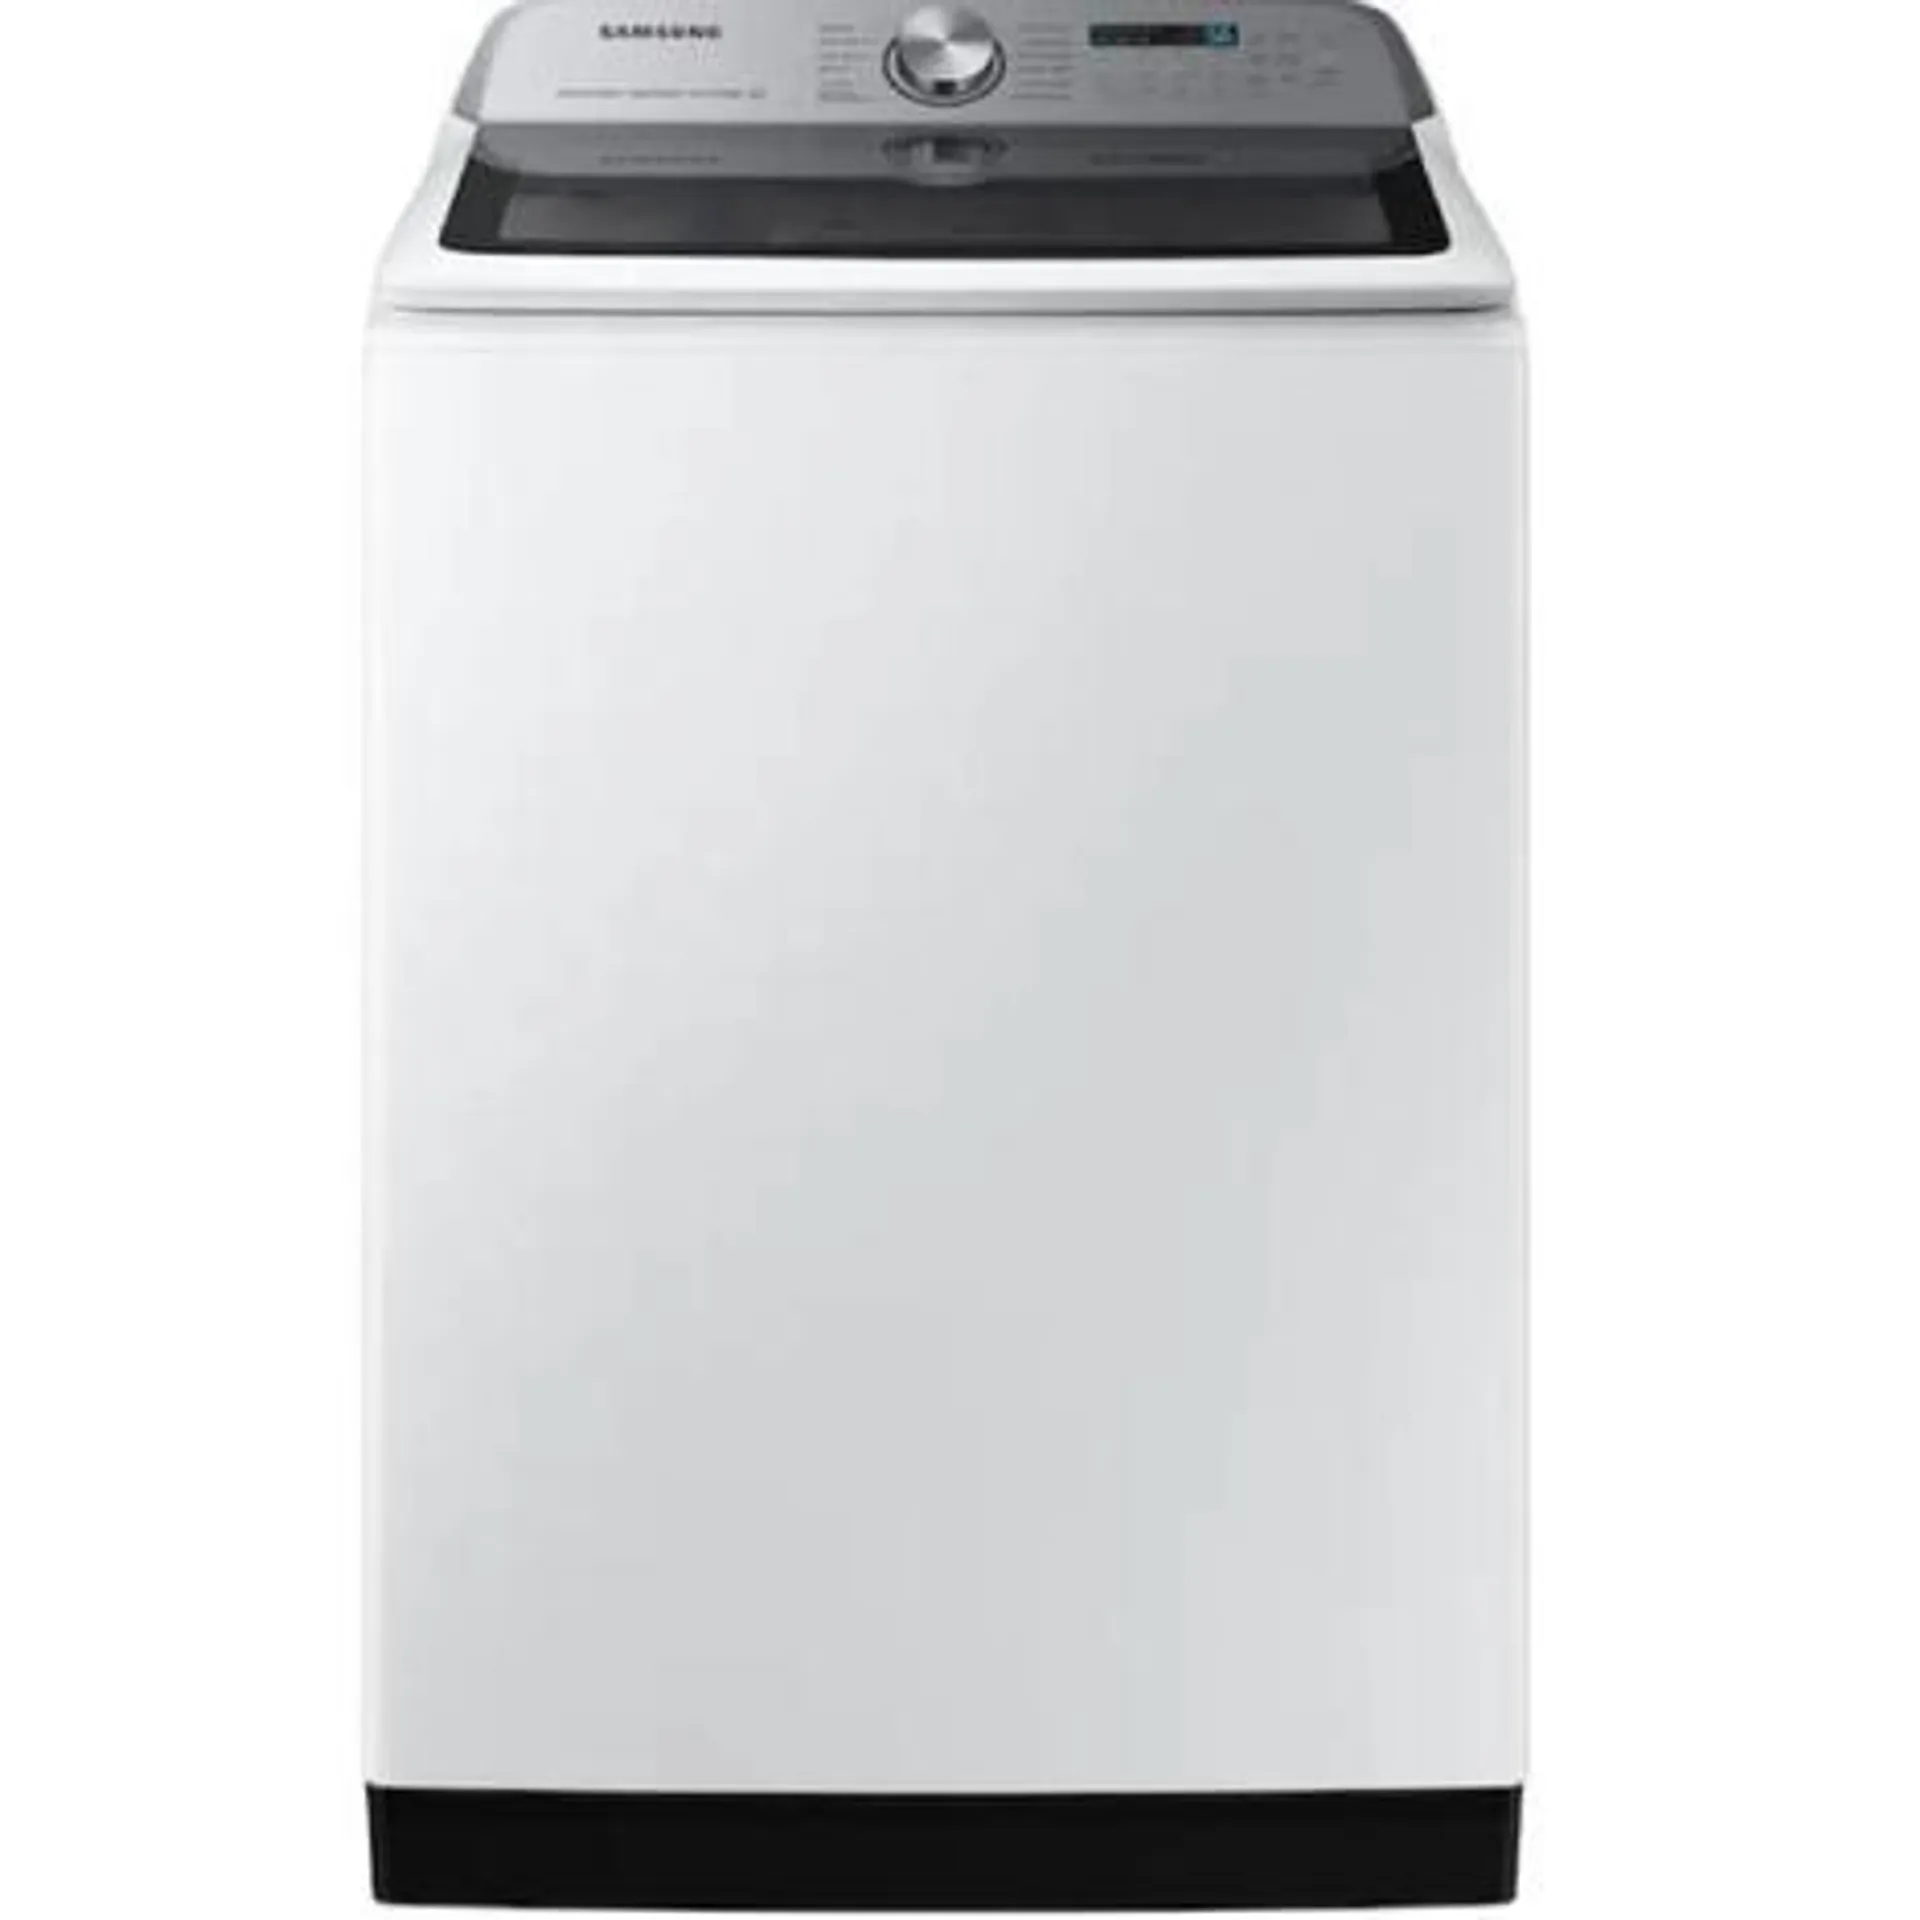 Samsung WA52A5500AW/US 5.2 cu. ft. White Smart Top Load Washer